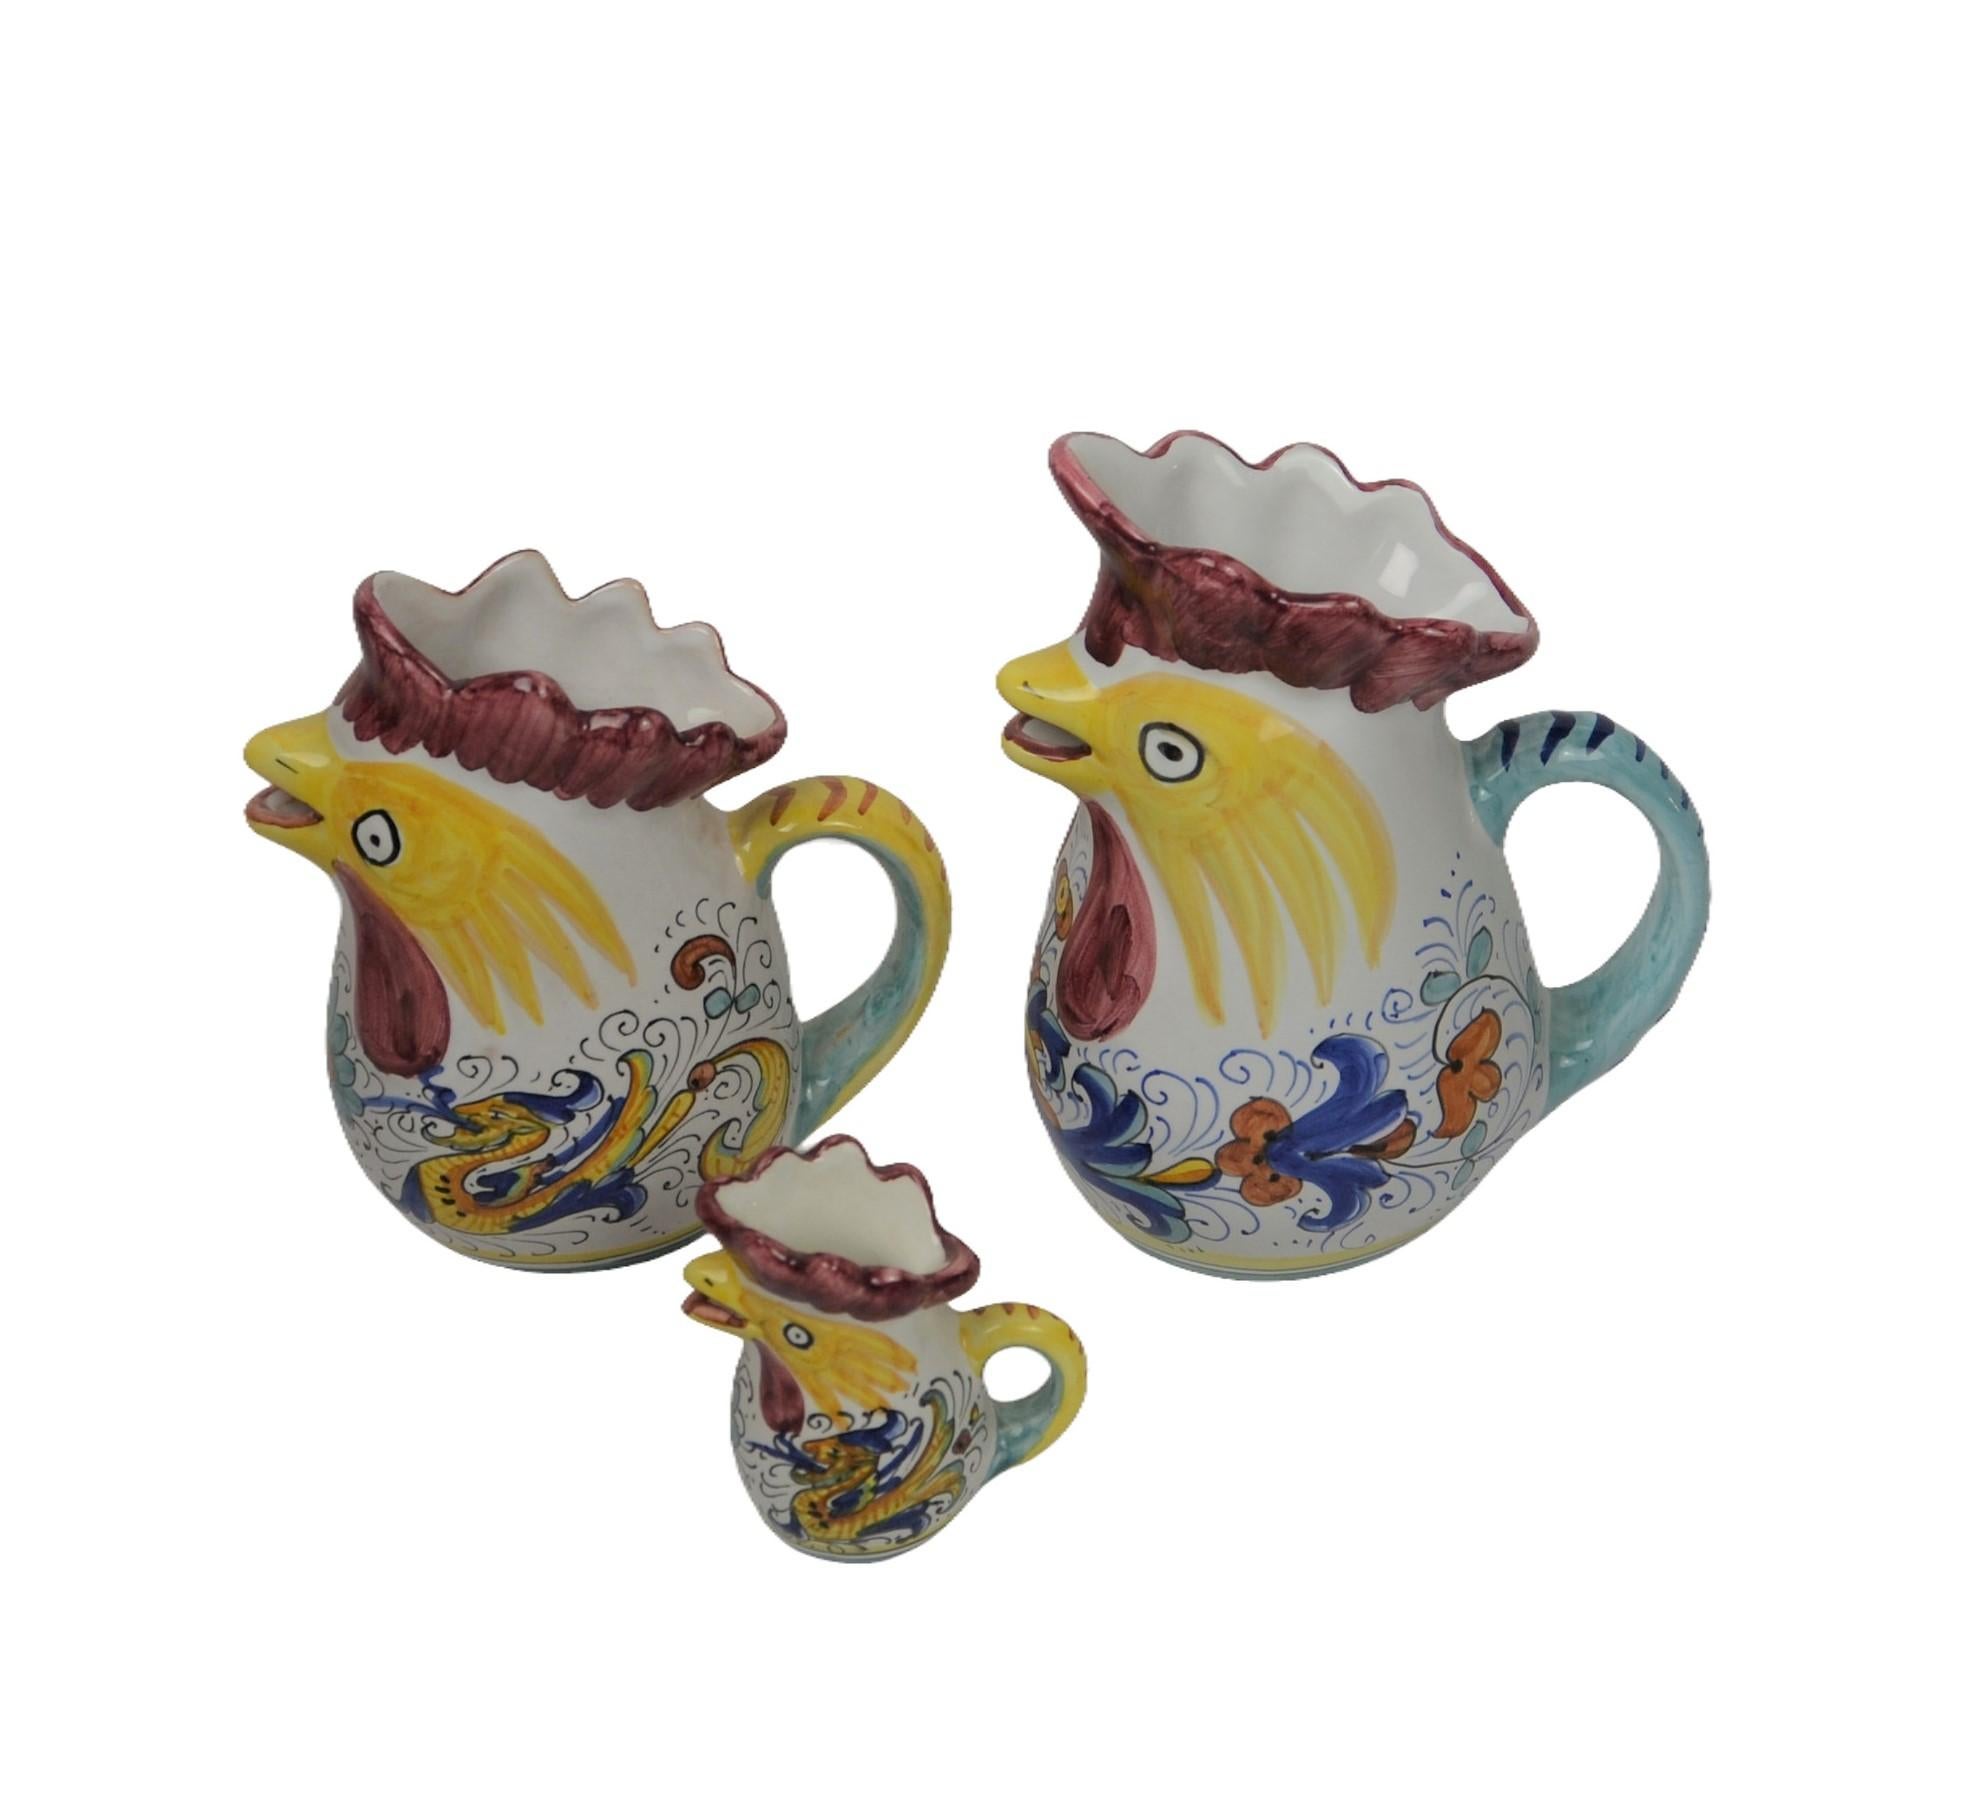 Beautifully hand-painted and made in Italy creamer set made by Franco Deruta.
Signed on the bottom 